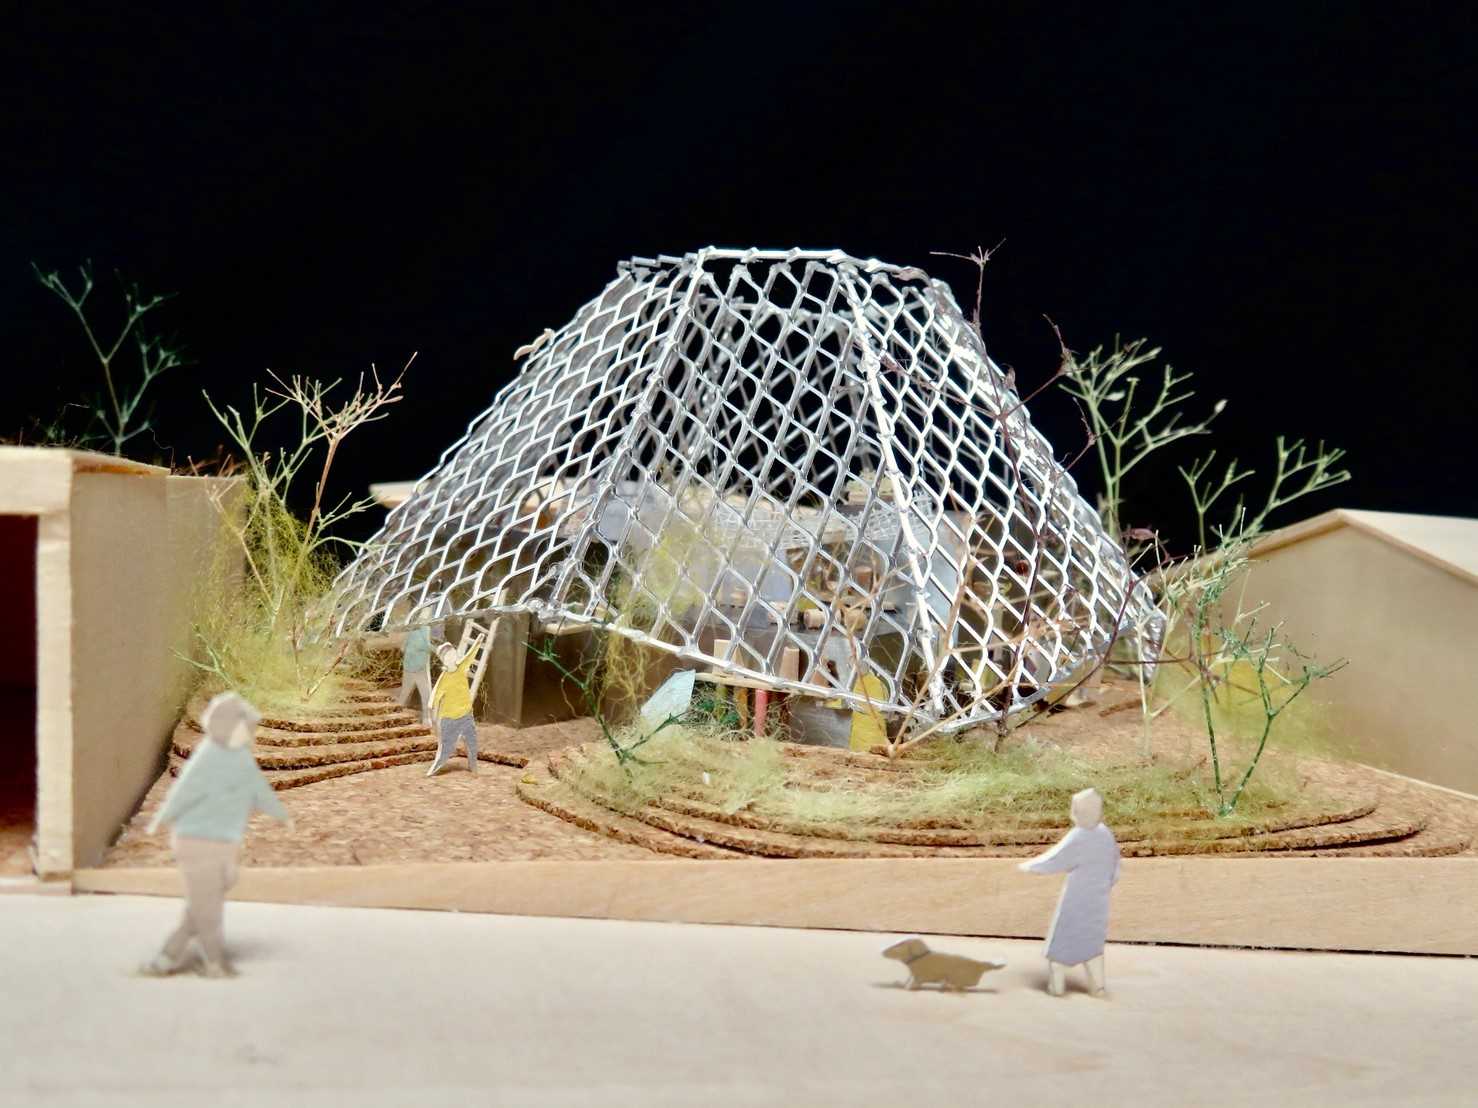 The model of a modern house with an octagonal design that was inspired by a spiderweb.